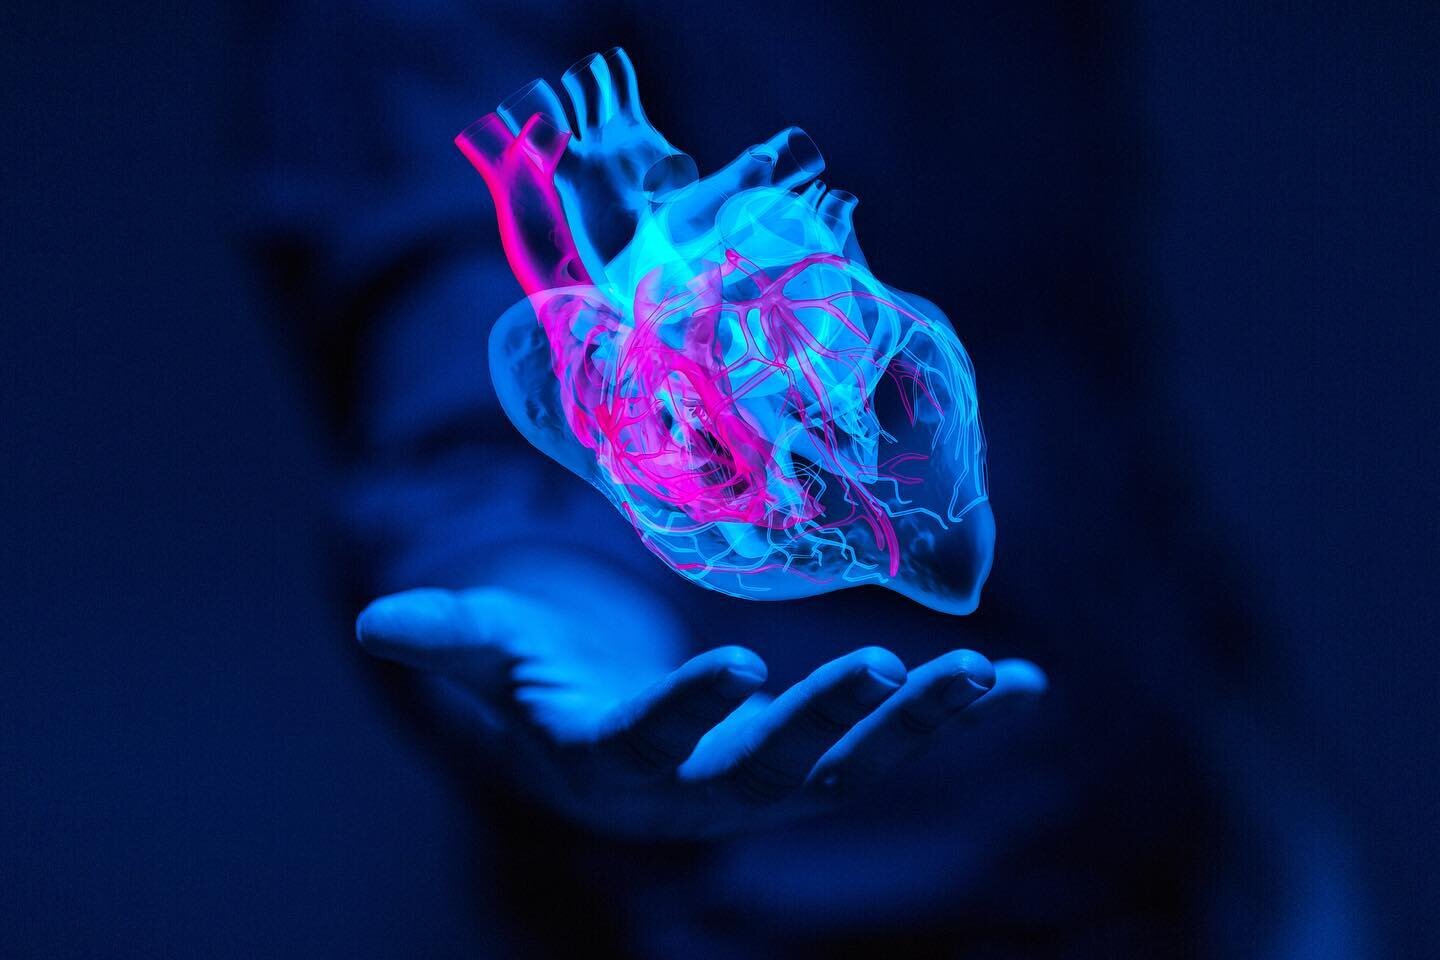 Cleerly is a a CT angiogram that surpasses traditional imaging of the heart, to provide a comprehensive analysis of your risk for a heart attack. The Cleerly analysis is designed to quantify plaque beyond what a radiologist can decipher from his eyes